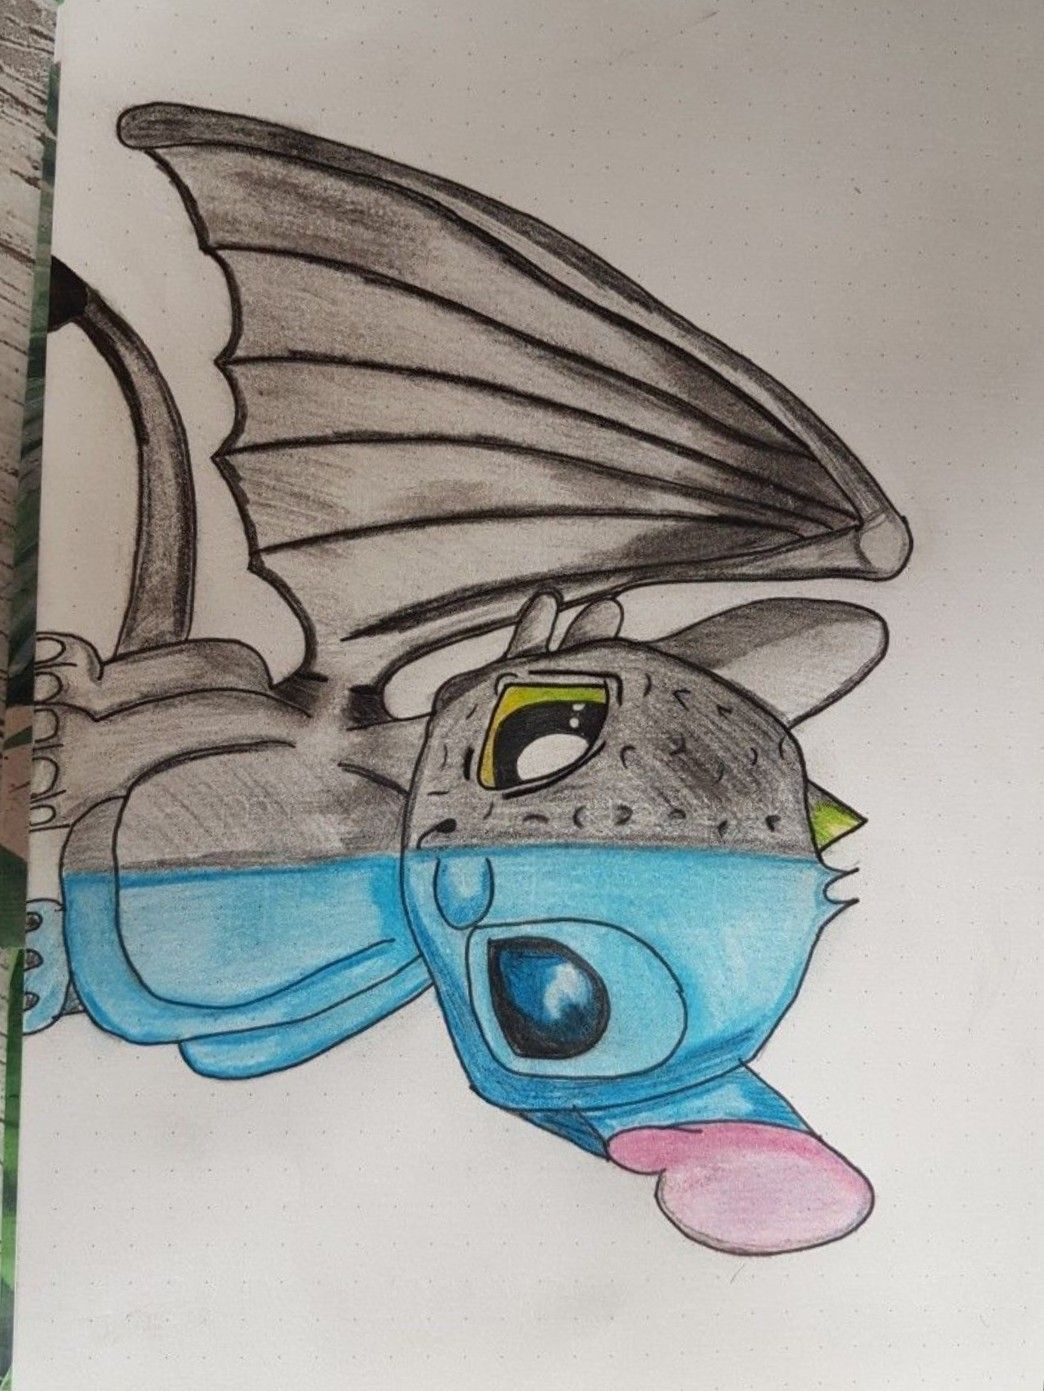 Stitch  Toothless on the  LALA INKY Tattoos  Art  Facebook